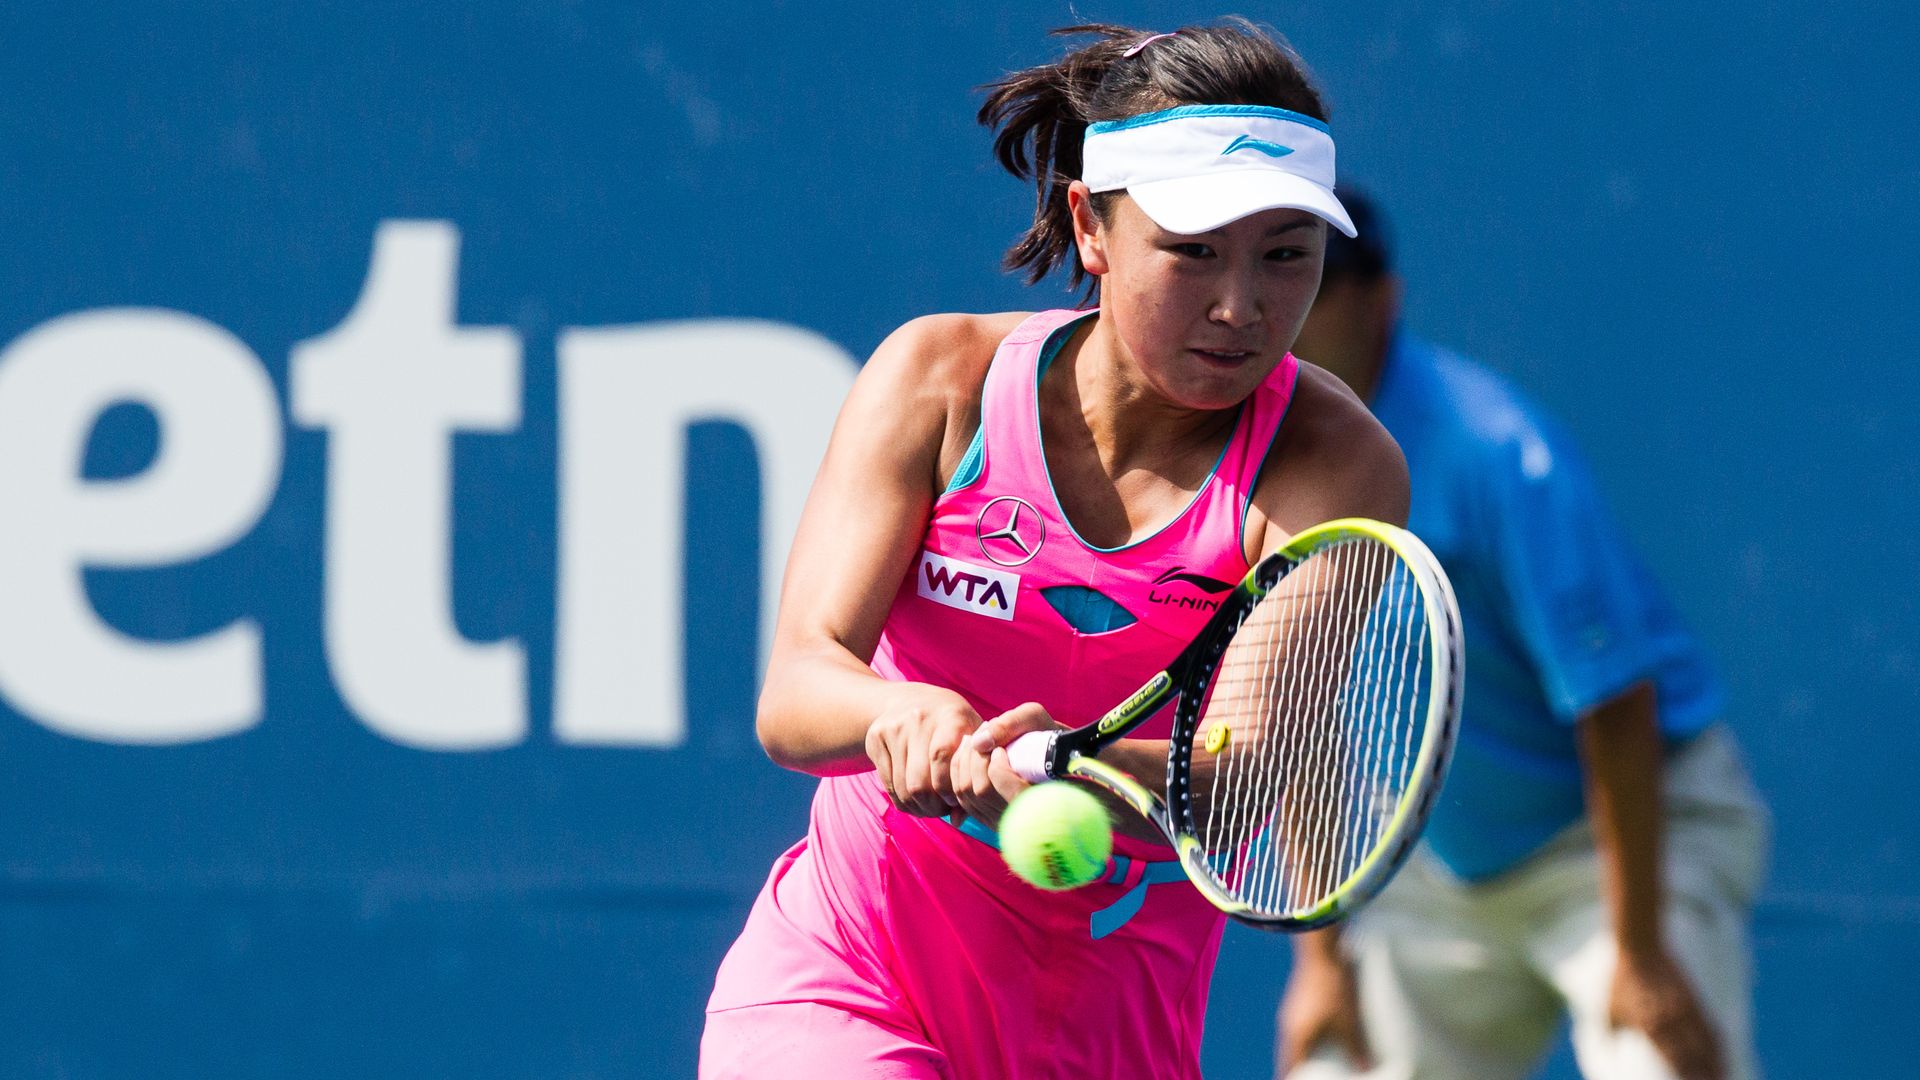 Shuai Peng during the Connecticut Open in August 2014.